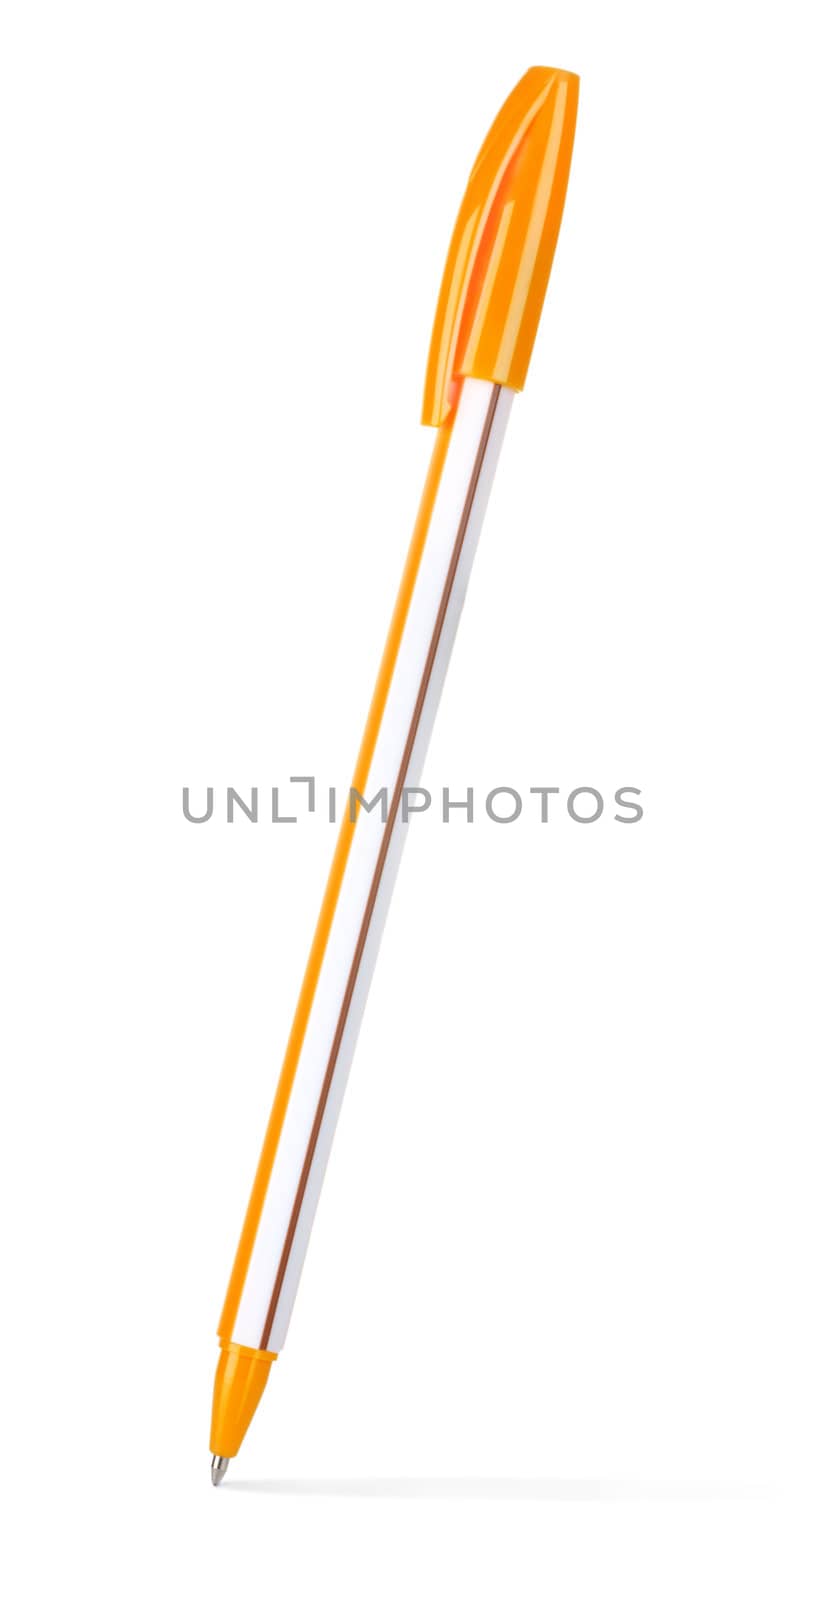 Ballpoint pen isolated on a white background. Clipping path